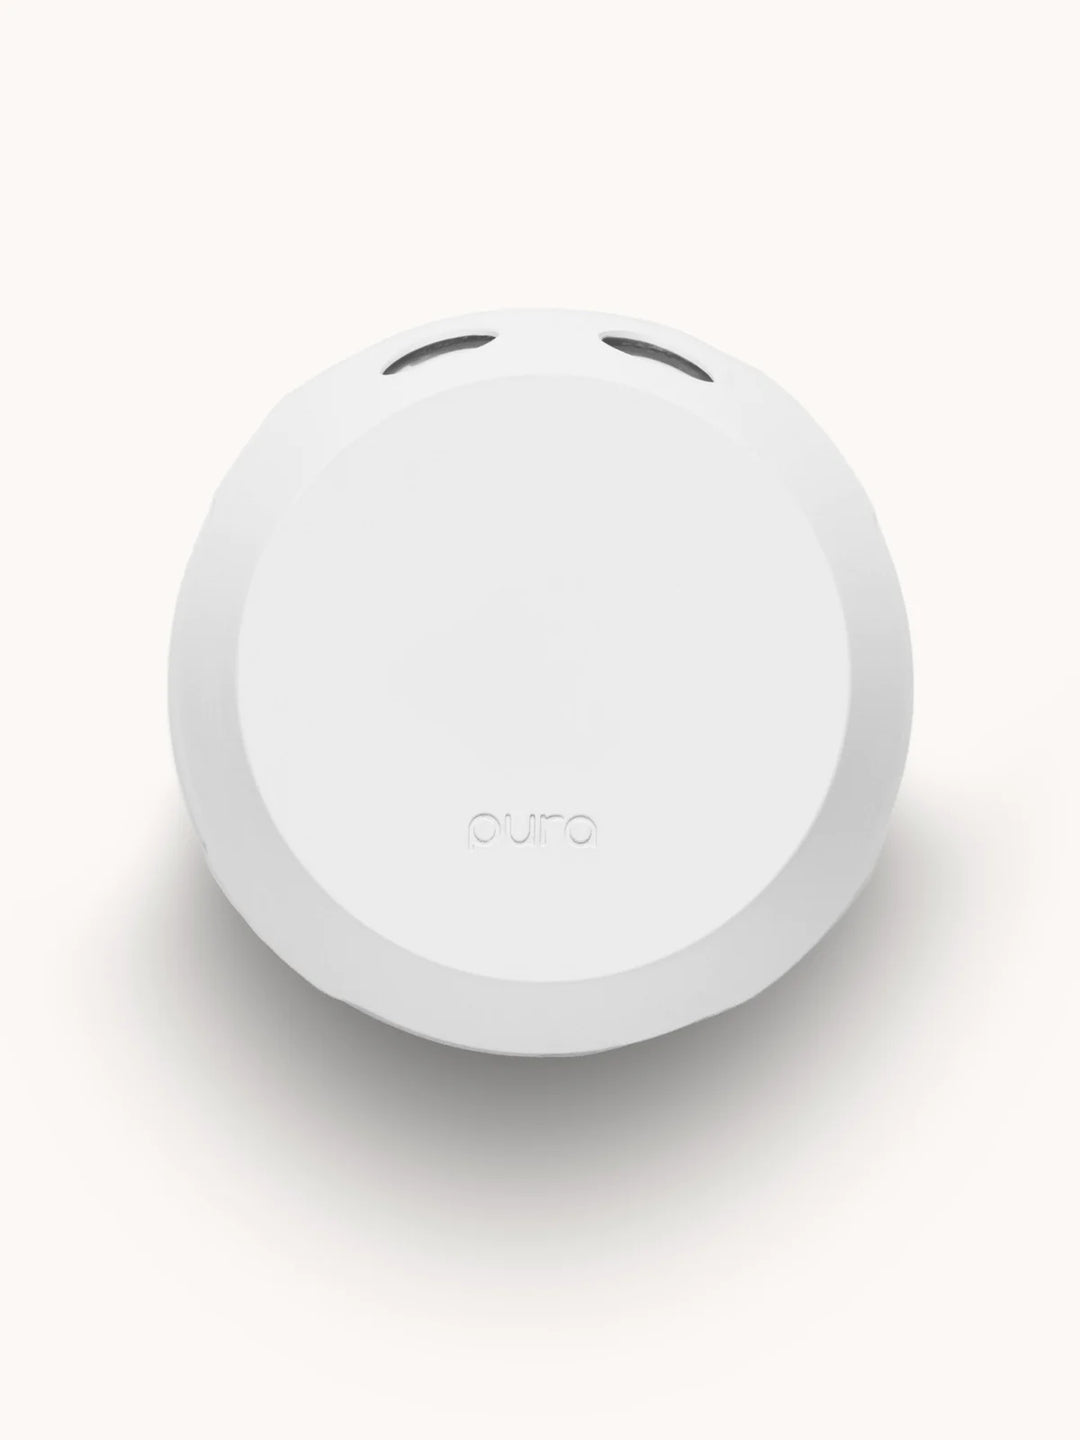 Pura Device 4- Scents sold separately